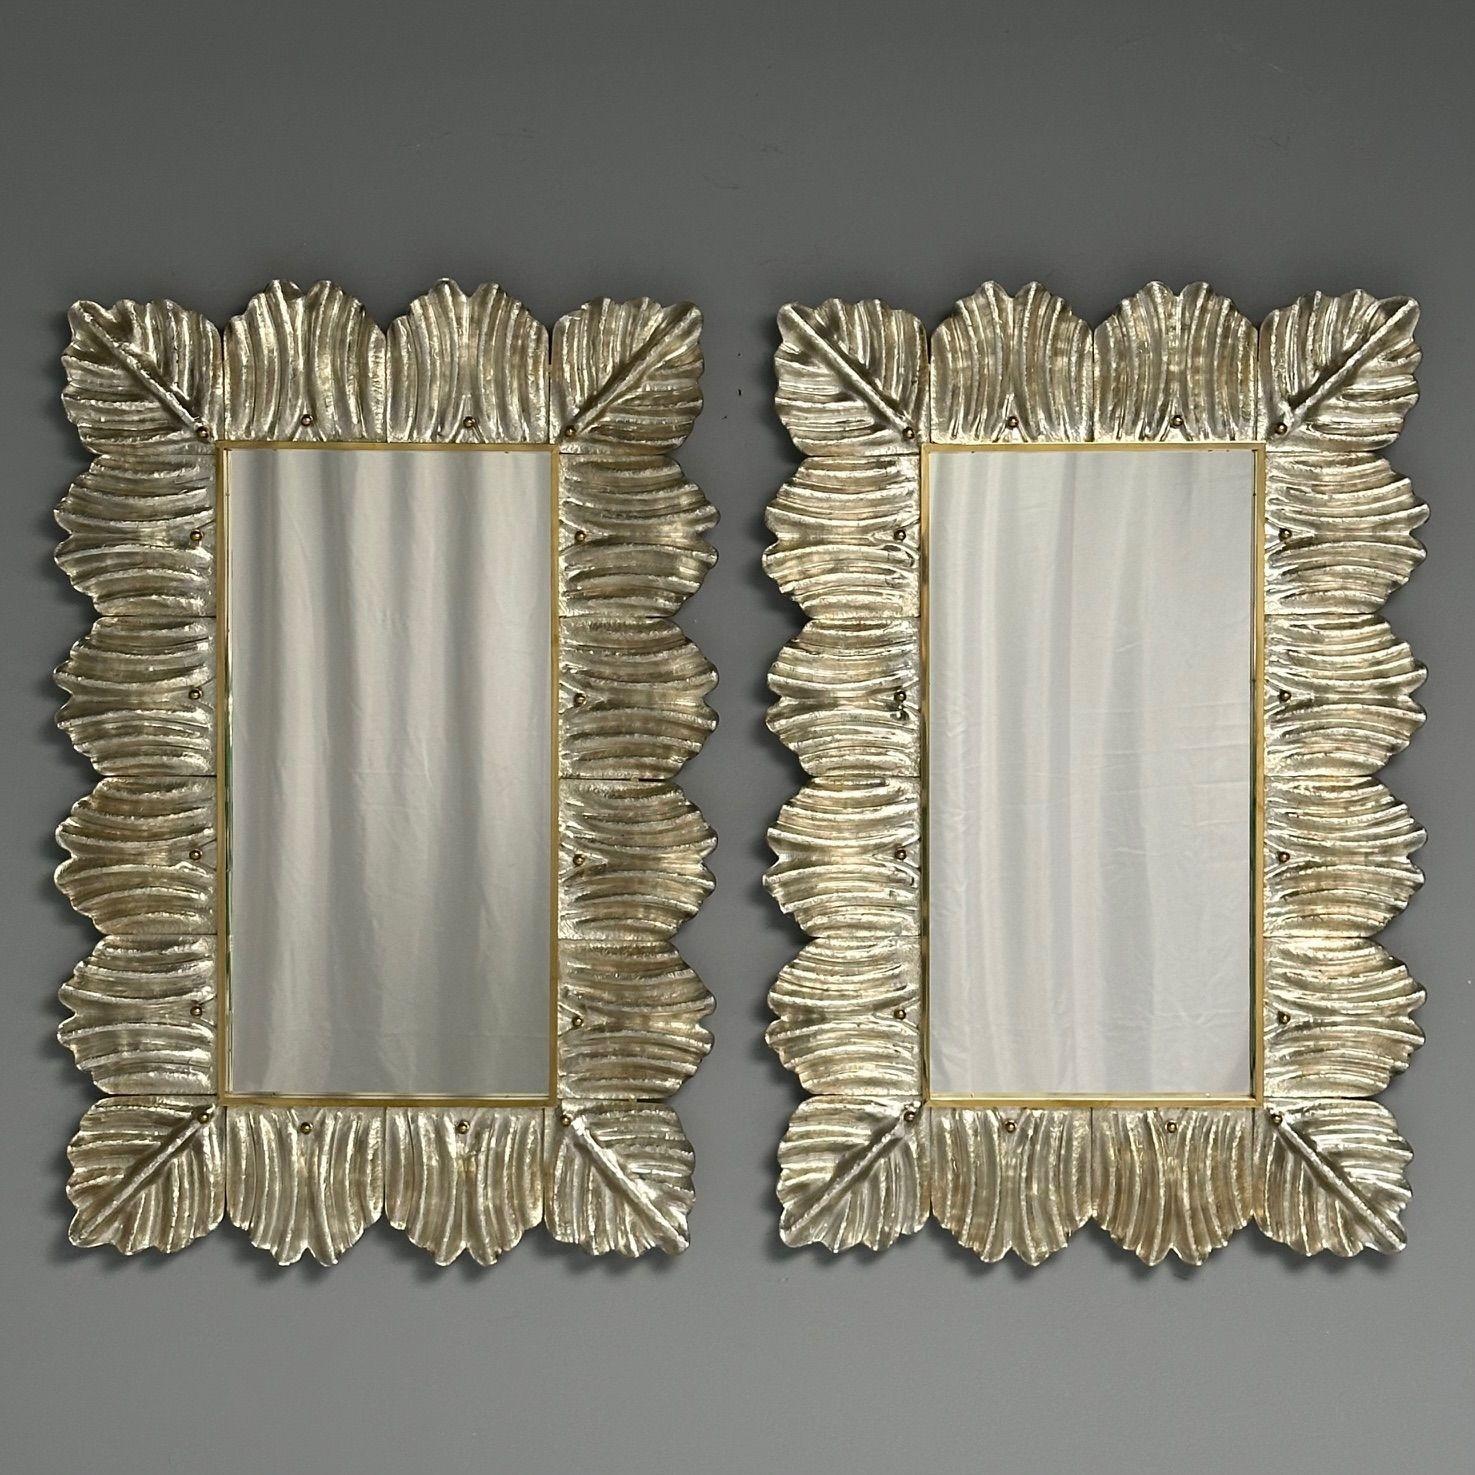 Contemporary, Wall Mirrors with Leaf Motif, Murano Glass, Silver Gilt, Italy, 2023

Pair of rectangular wall mirrors designed and handcrafted in a small workshop in Venice, Italy. Each mirror has a silver leaf motif Murano glass frame and holes on